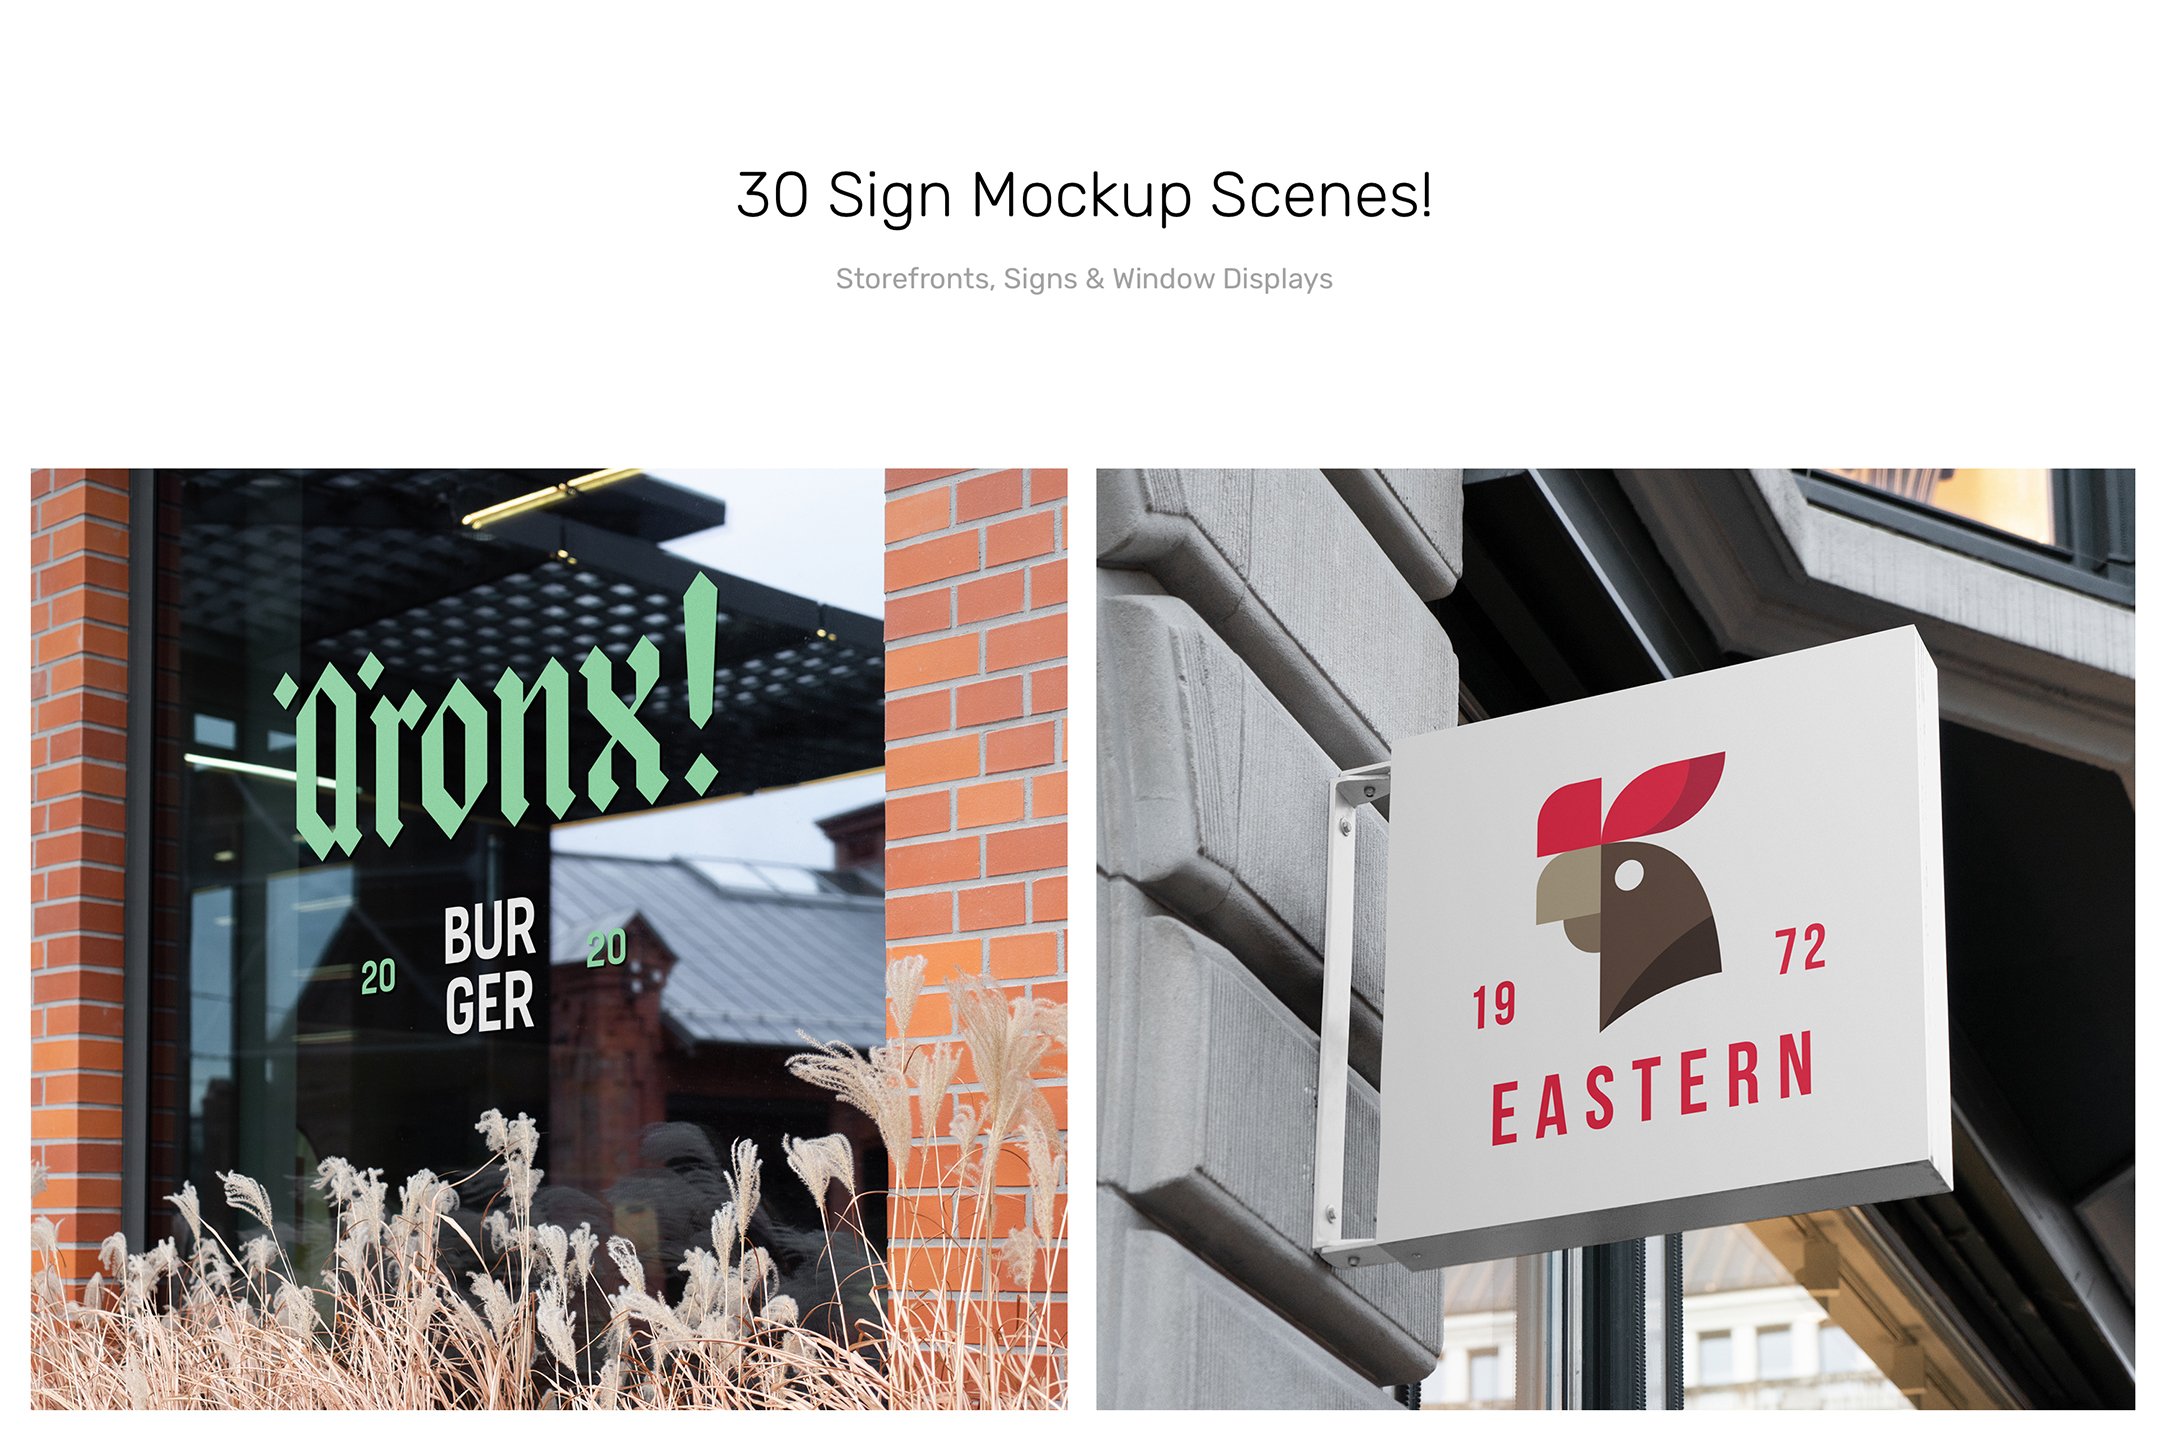 The 400+ Magnificent Mockups Collection